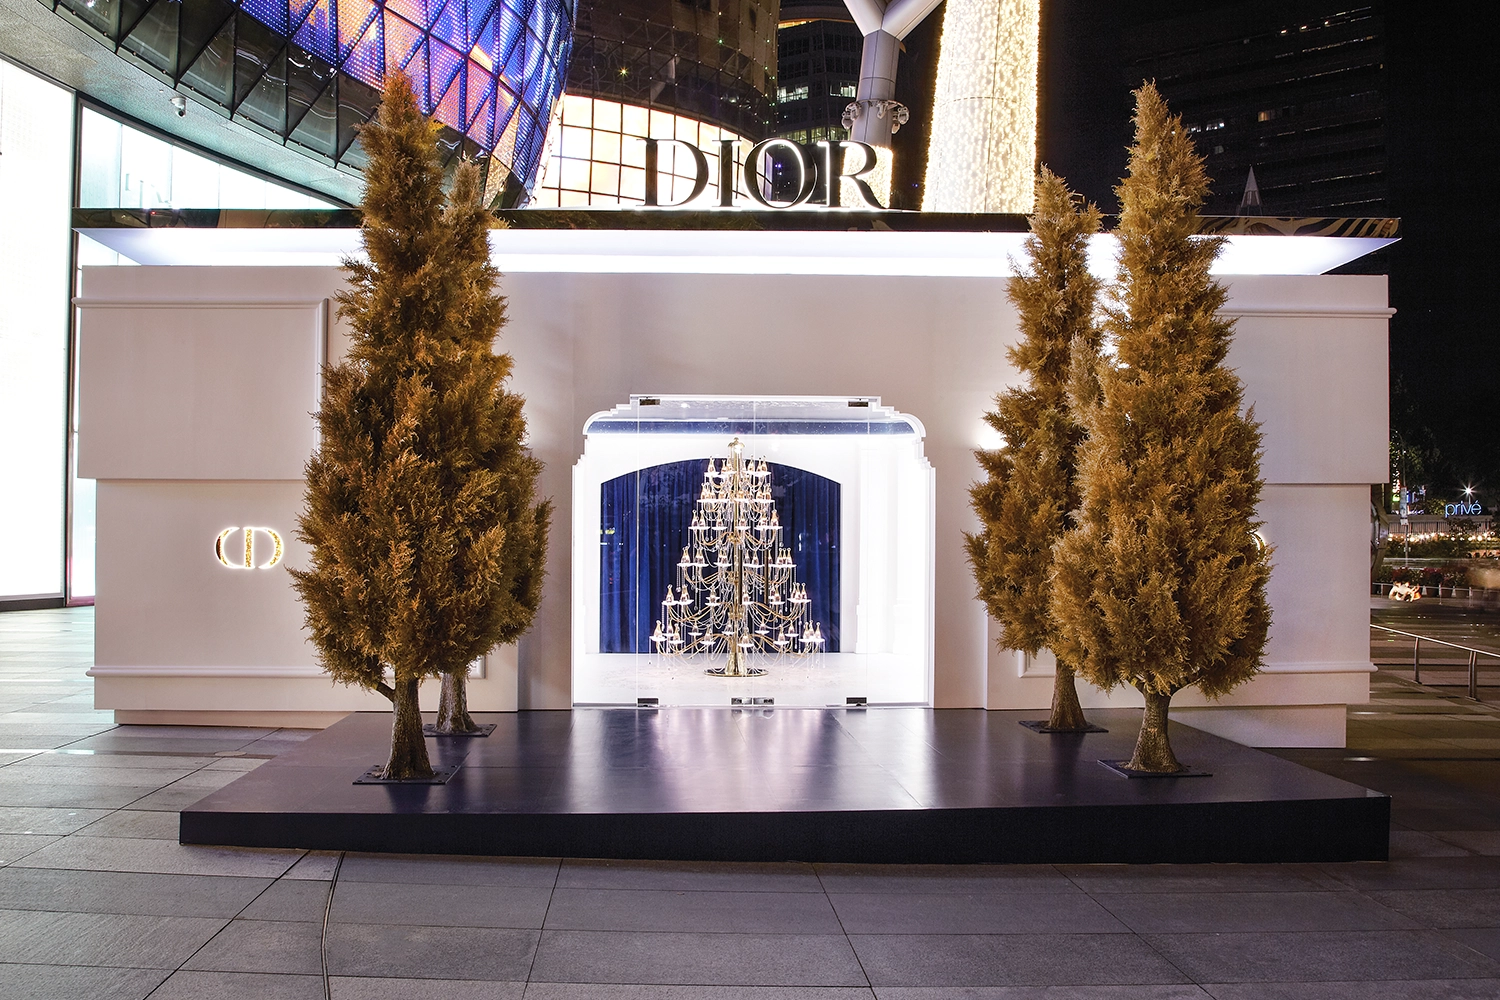 Dior ‘The Atelier of Dreams’ | Brand Activation | Dezign Format